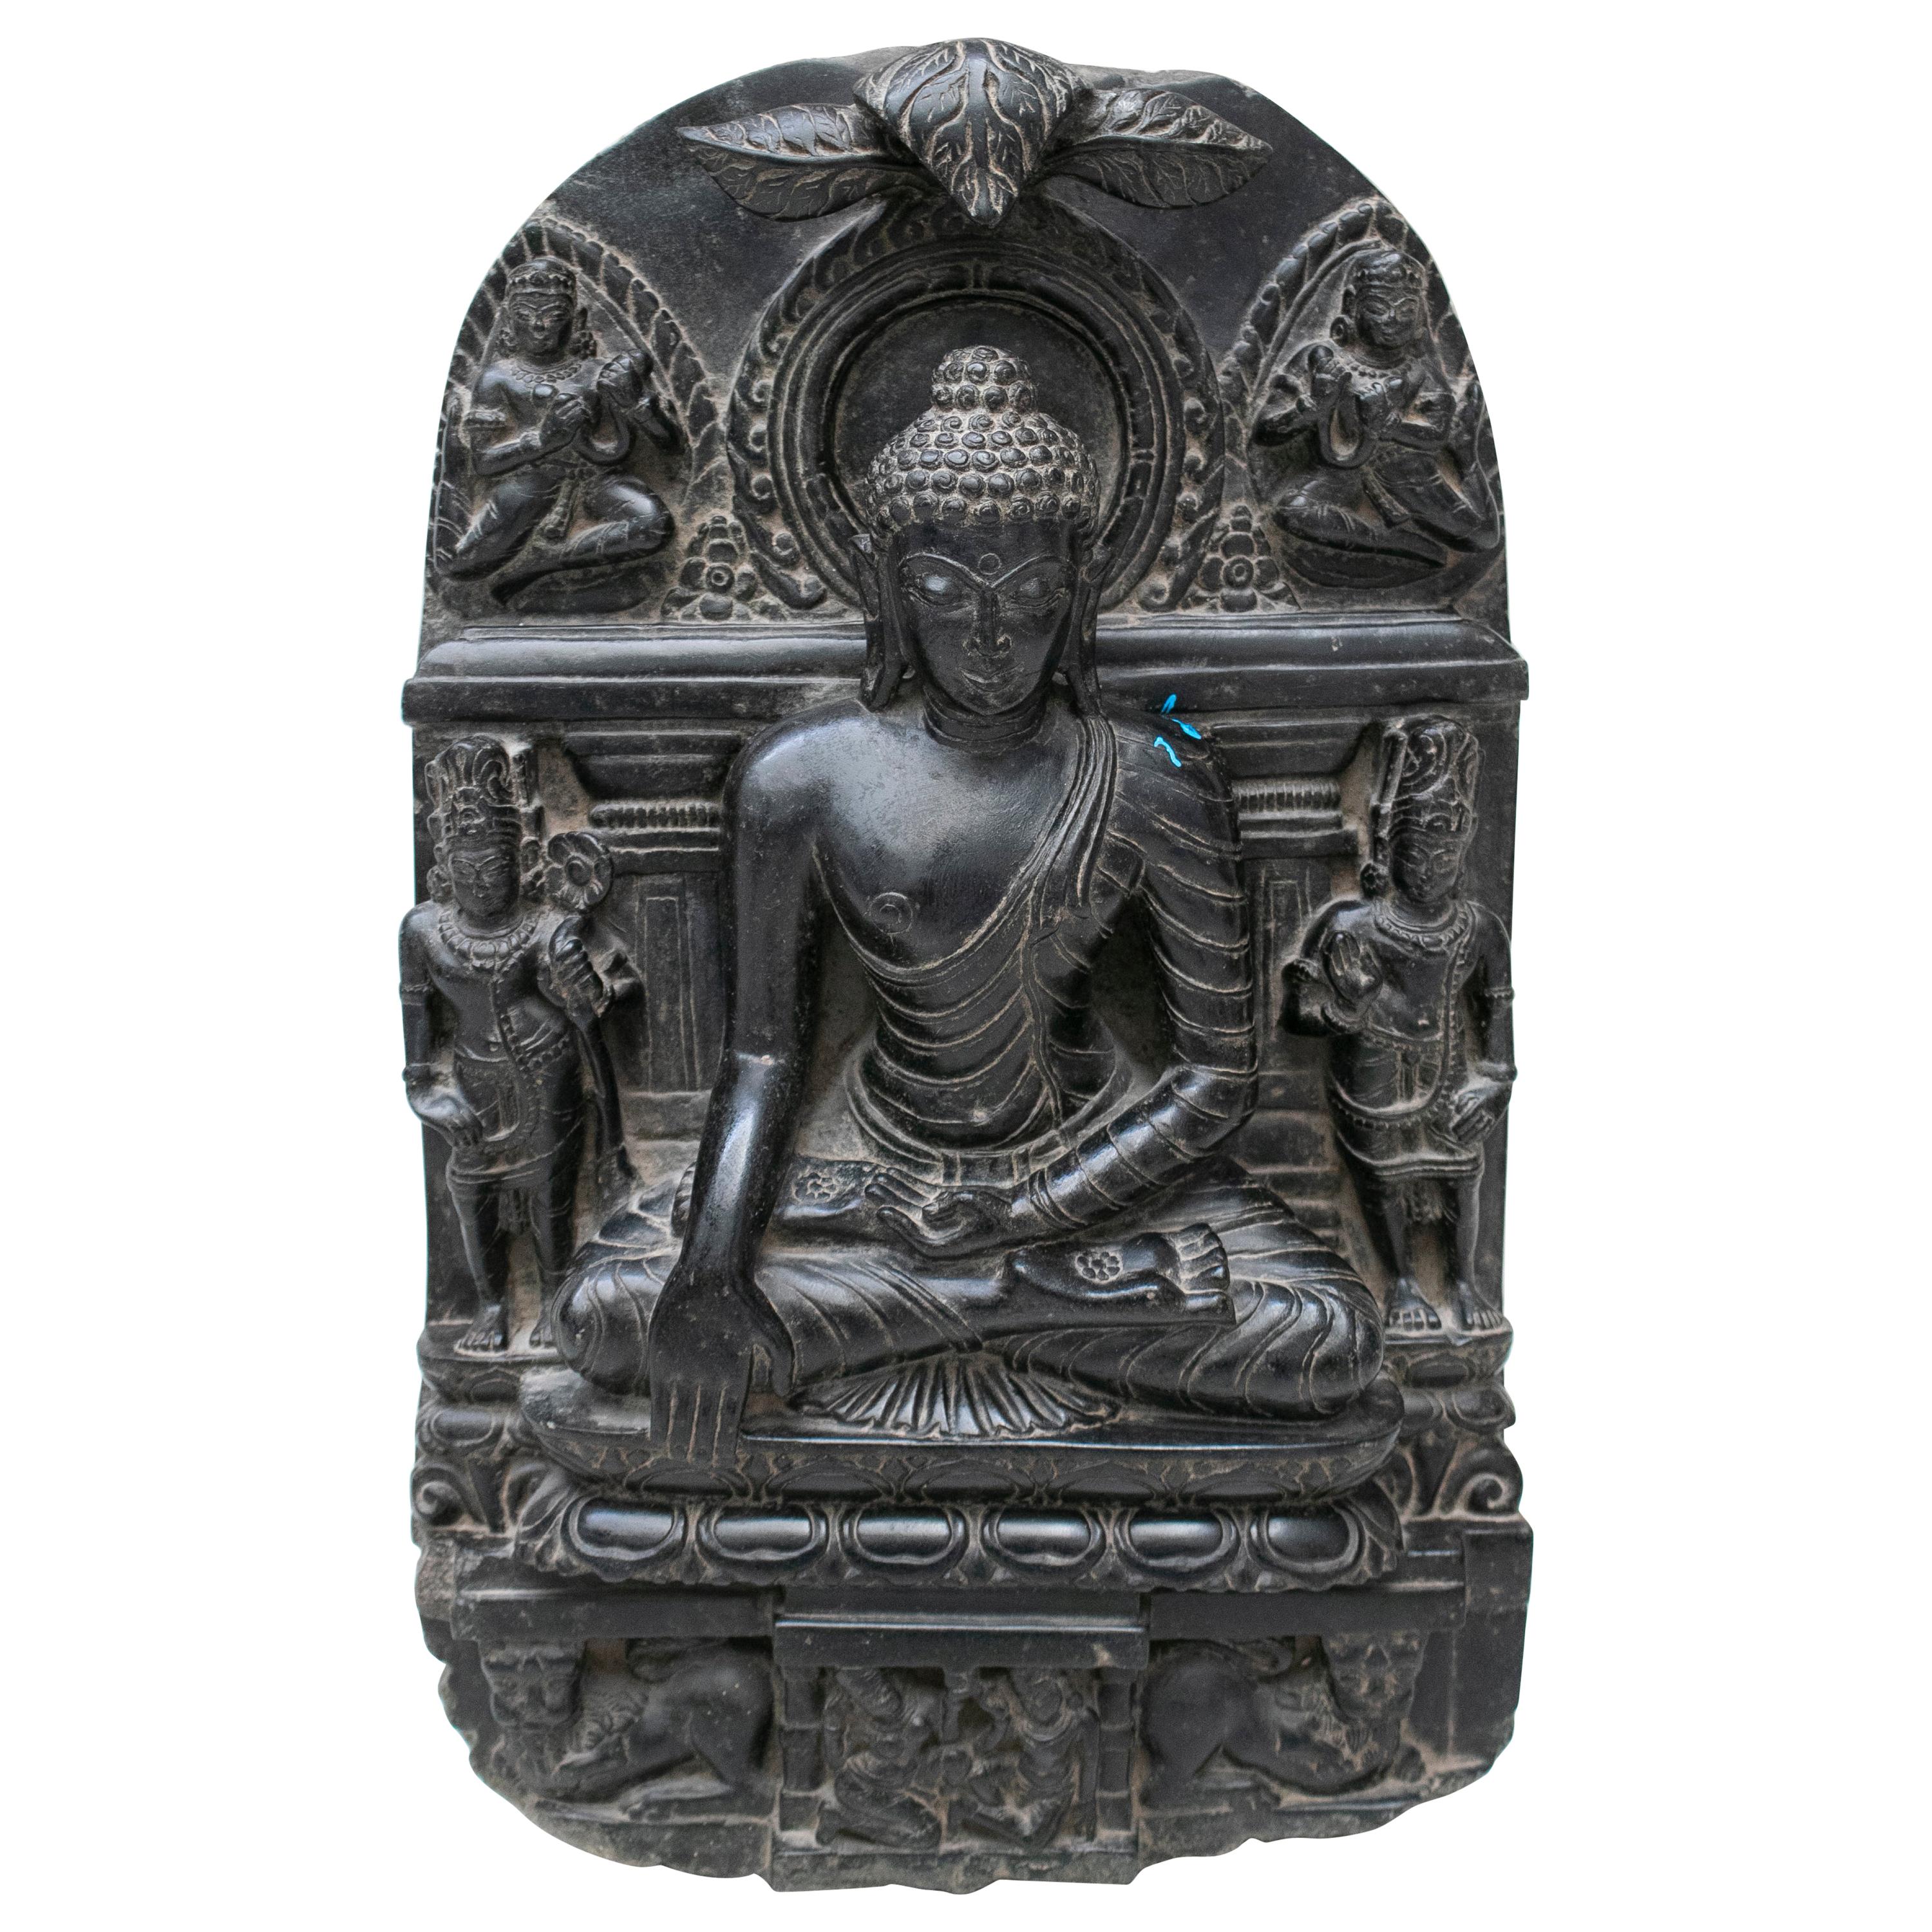 1995 Indian Black Marble Hand Carved Sitting Buddha Statue